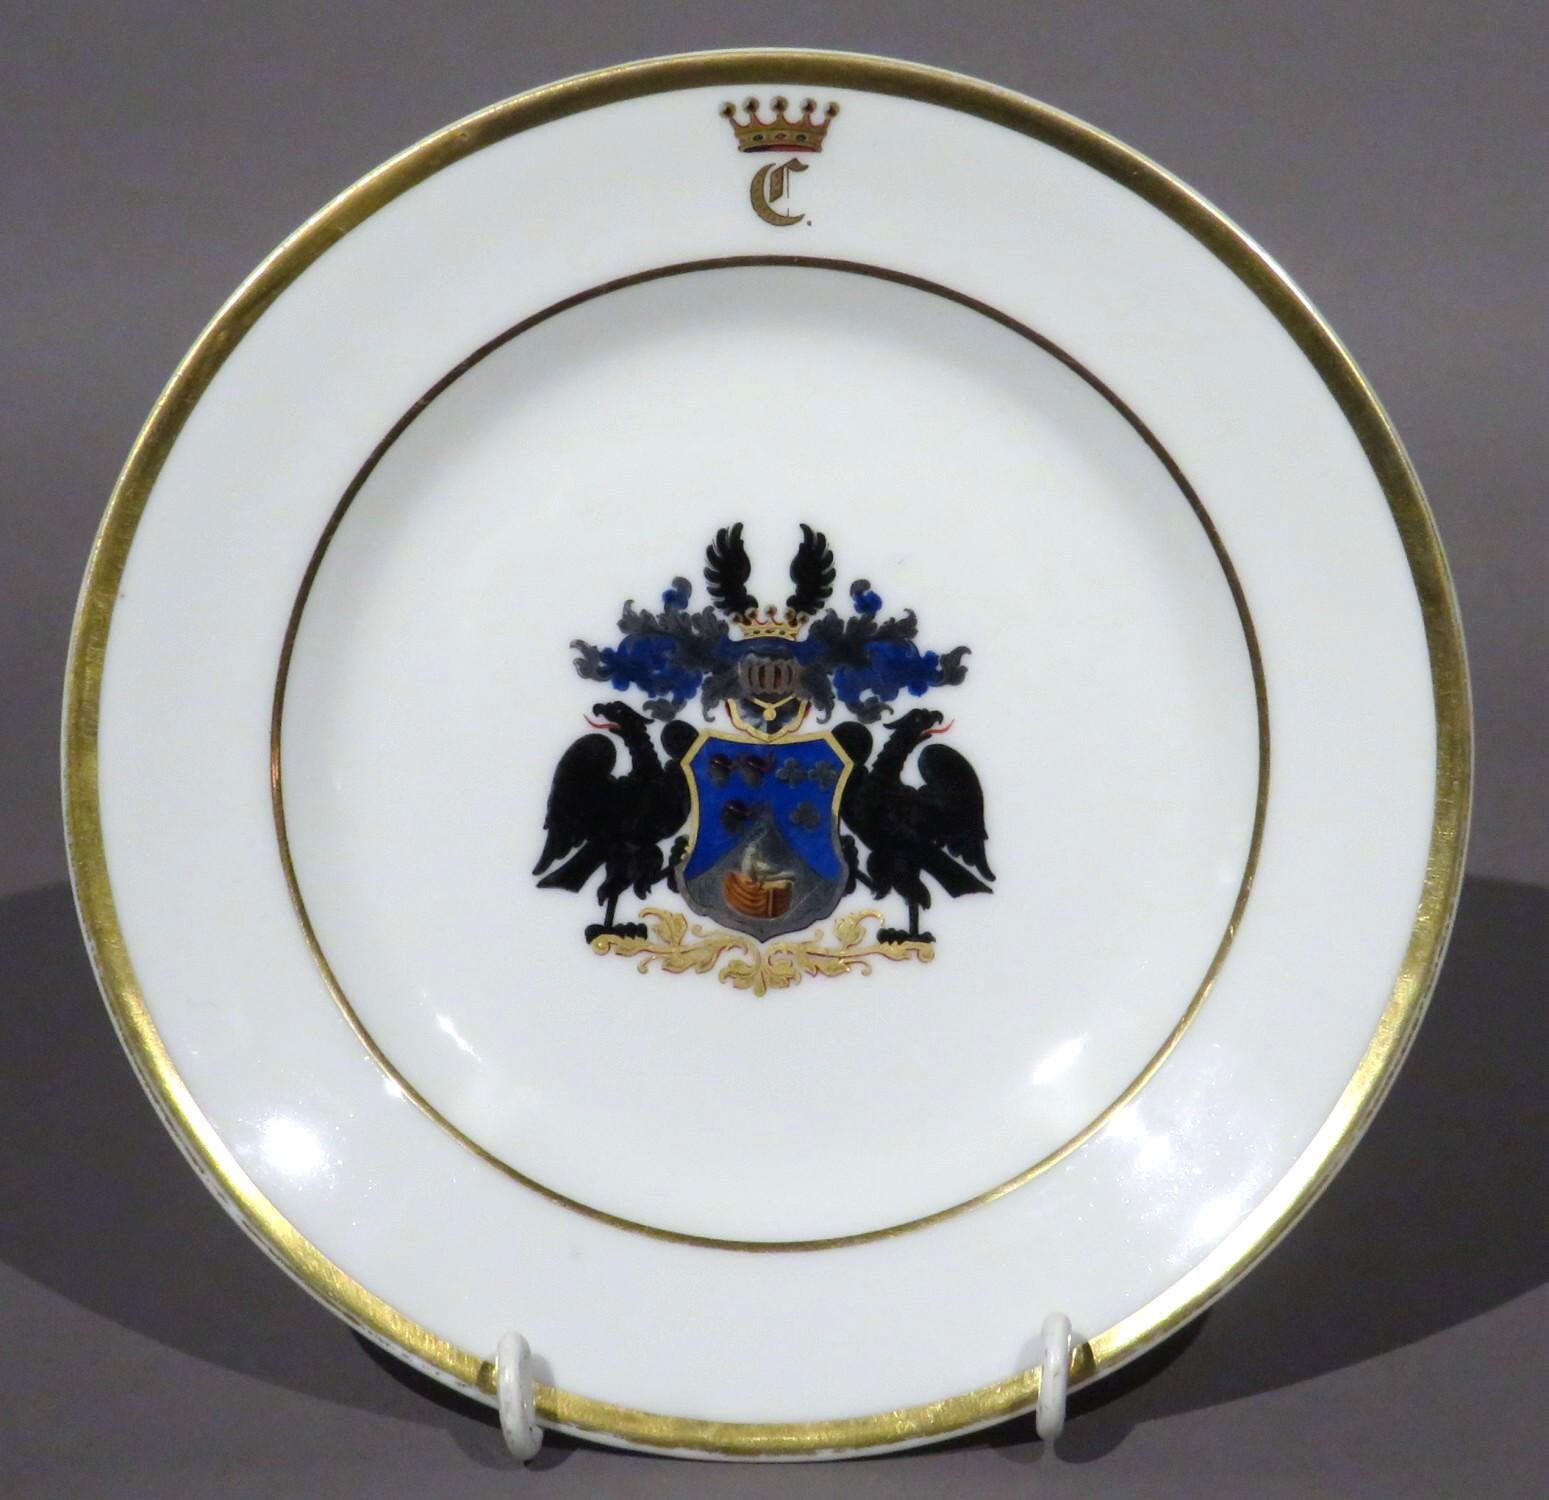 Both showing a central field decorated with striking hand painted Heraldic crests, the rims decorated with hand painted Baronial coronets within gilt edged detail. The reverse of each plate inscribed with a dedication denoting Baronial titles